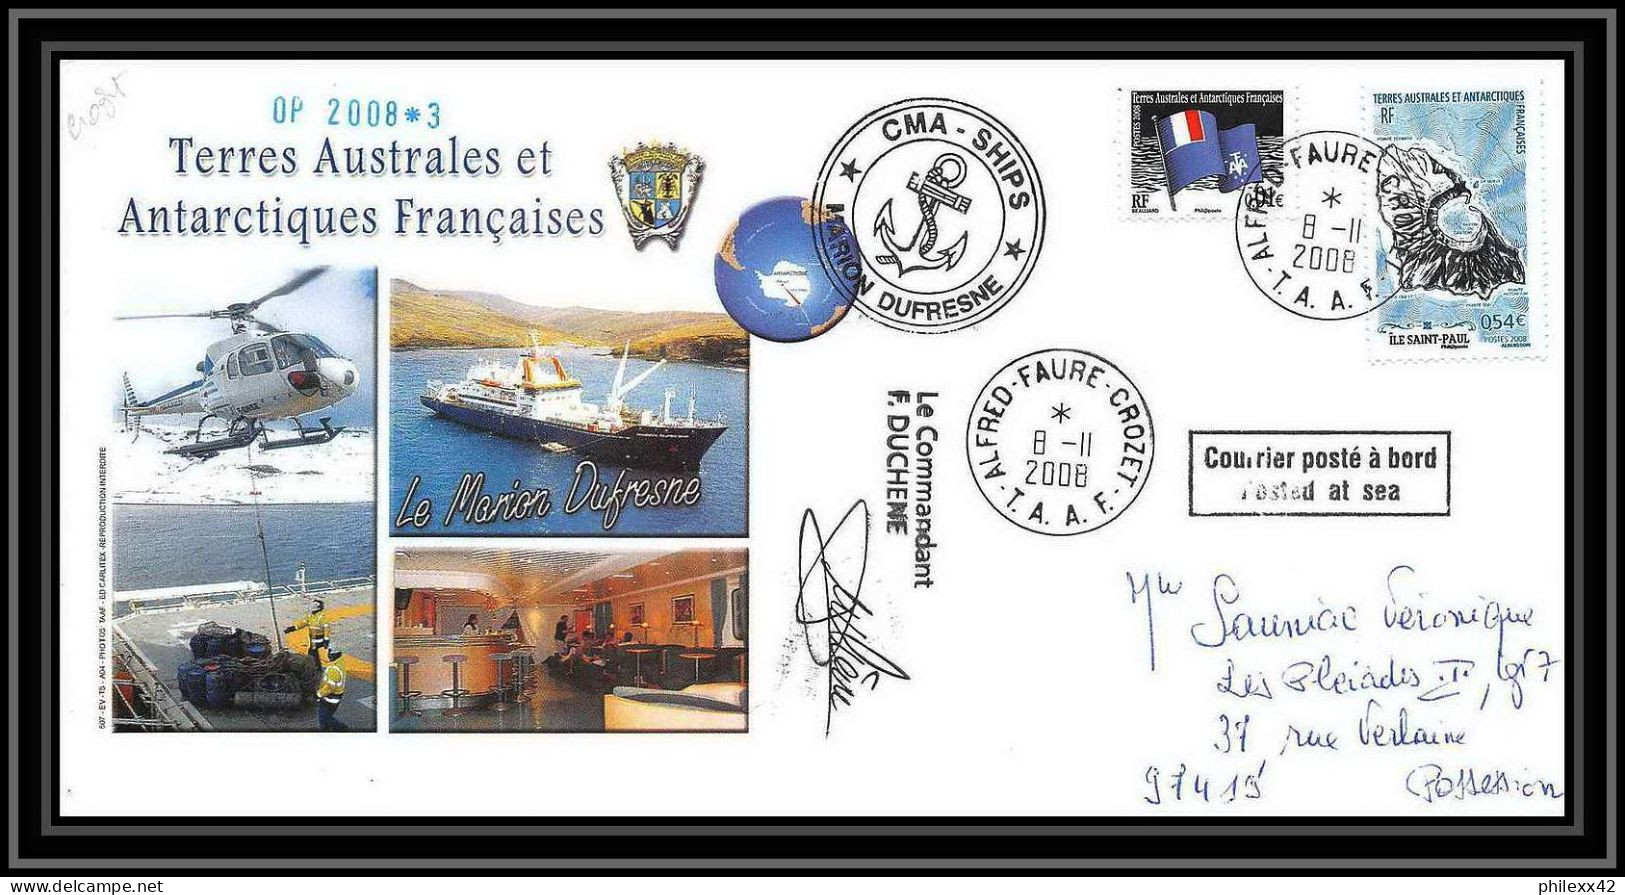 2845 ANTARCTIC Terres Australes TAAF Helilagon Lettre Cover Dufresne Signé Signed Op 2008/3 Crozet 8/11/2008 N°506 - Helicopters